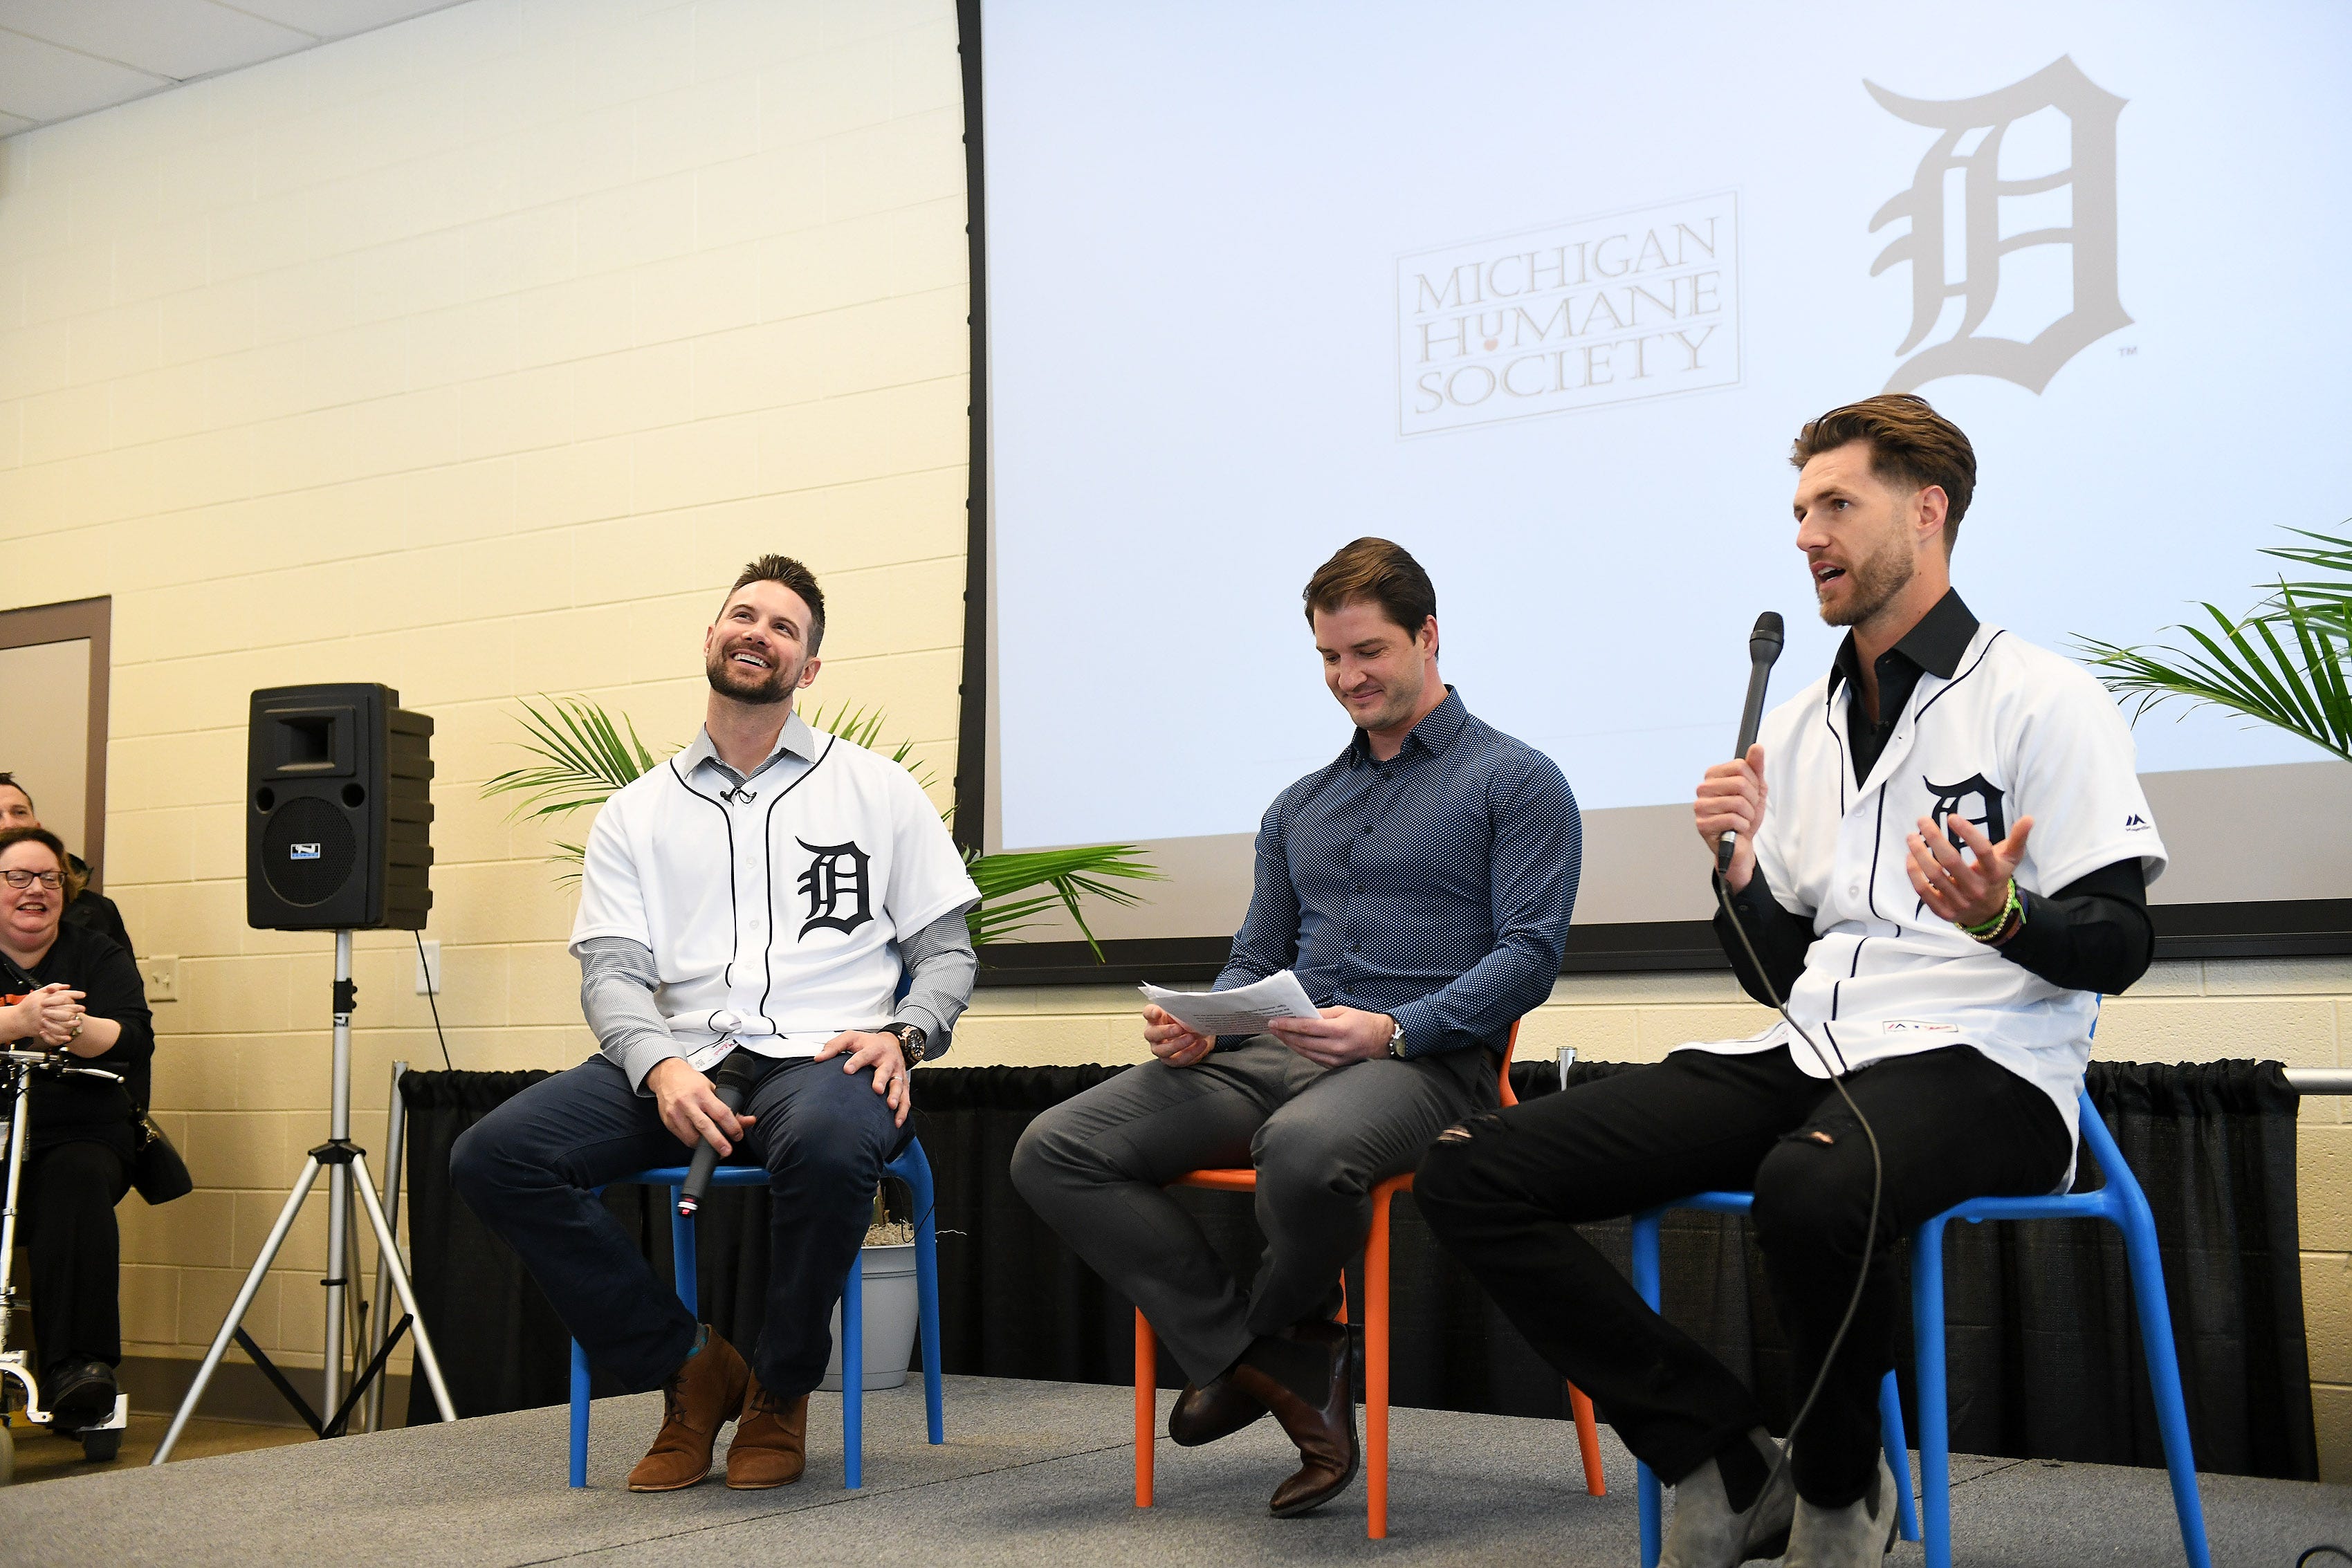 Tigers' Jordy Mercer, left, and Shane Greene, right, answer questions from the people gathered, moderated by Johnny Kane from Fox Sports Detroit, center, at the Michigan Humane Society.